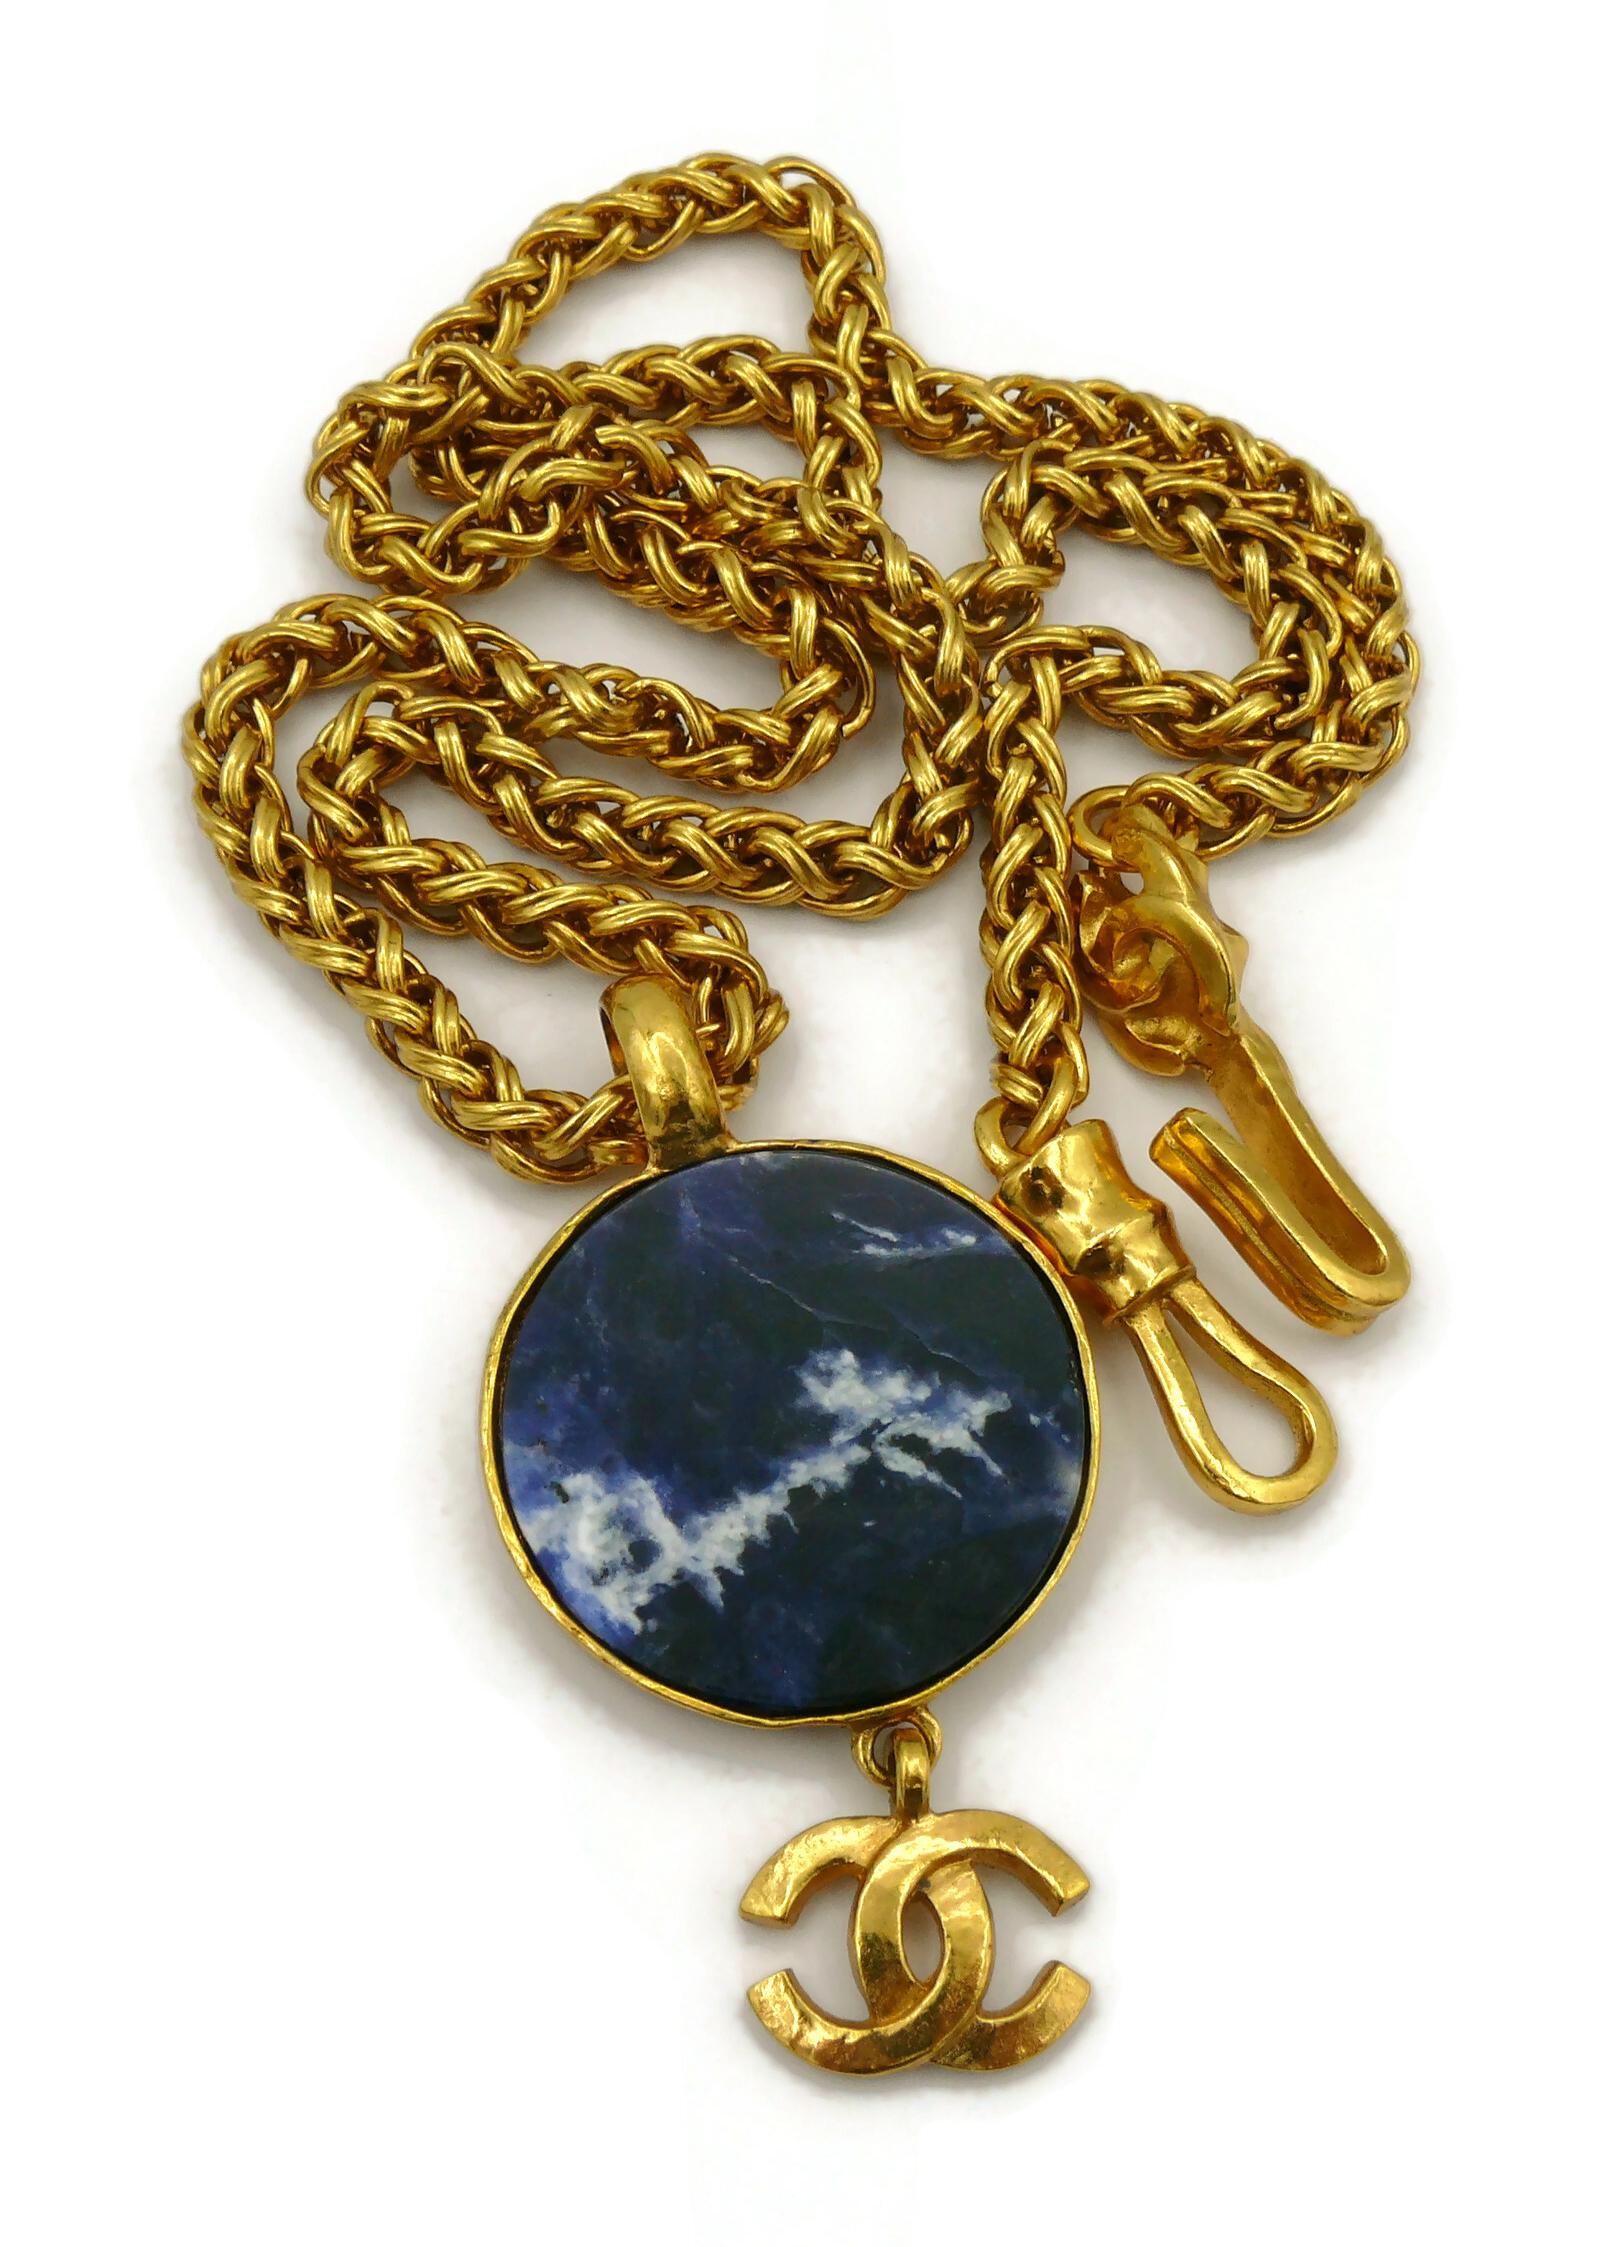 CHANEL by KARL LAGERFELD Vintage Marbled Blue Disc Logo Pendant Necklace, 1995 For Sale 8